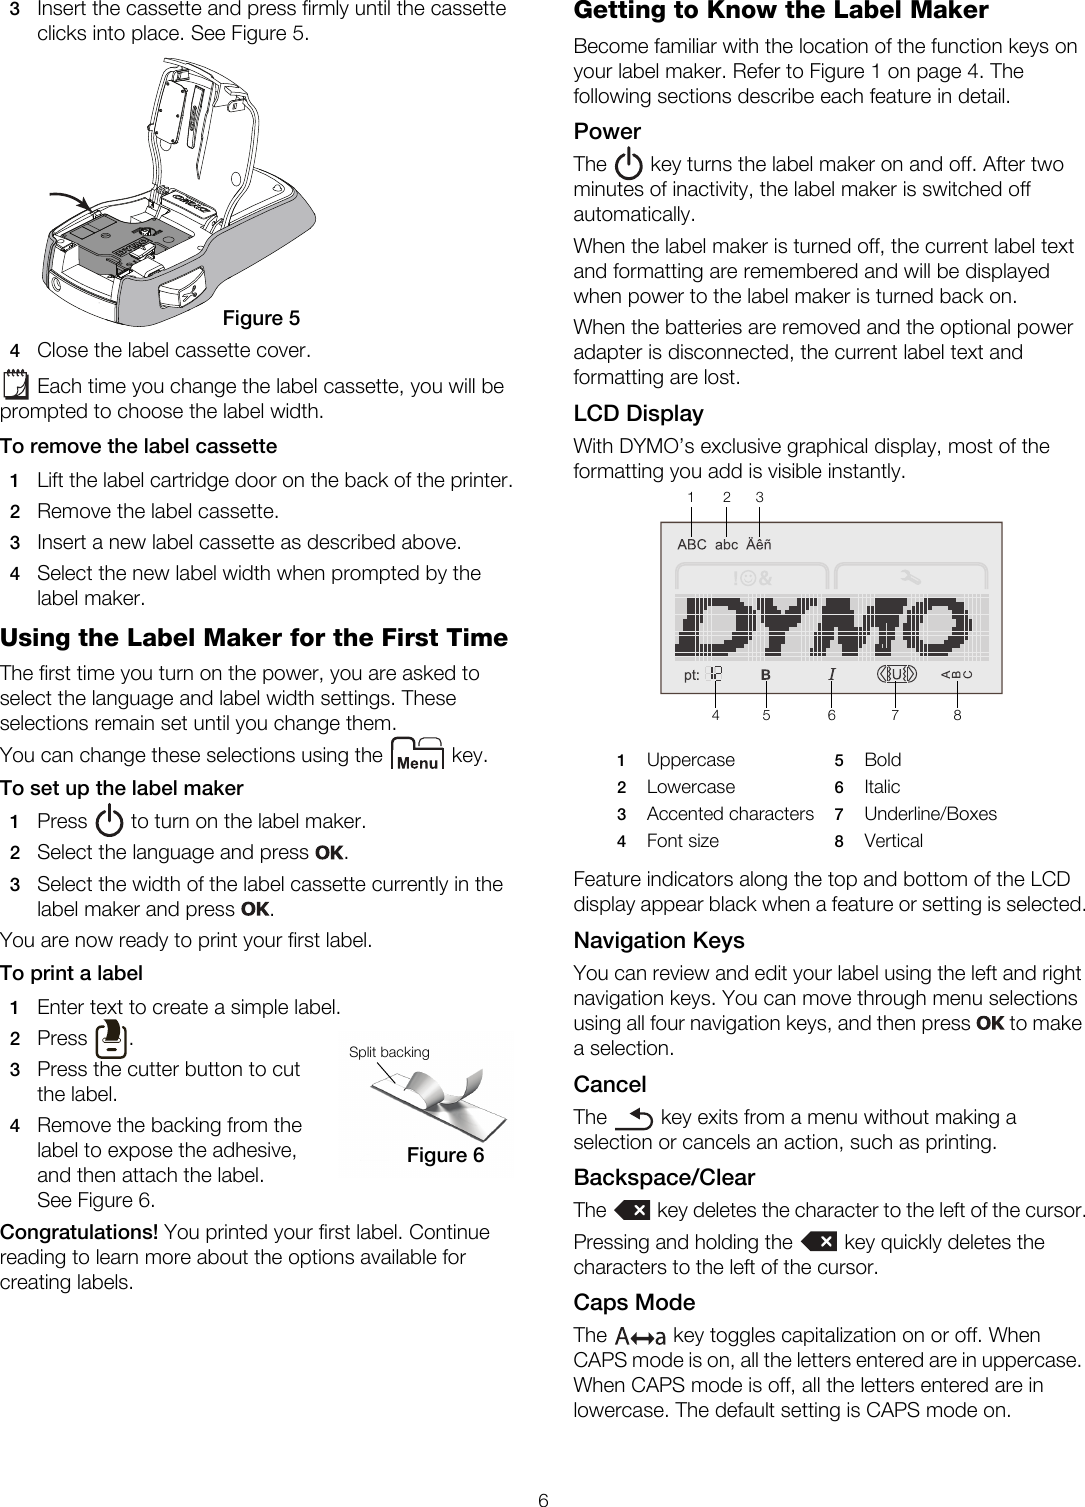 Page 6 of 11 - Dymo Dymo-Labelmanager-160-Users-Manual- LabelManager 160 User Guide  Dymo-labelmanager-160-users-manual